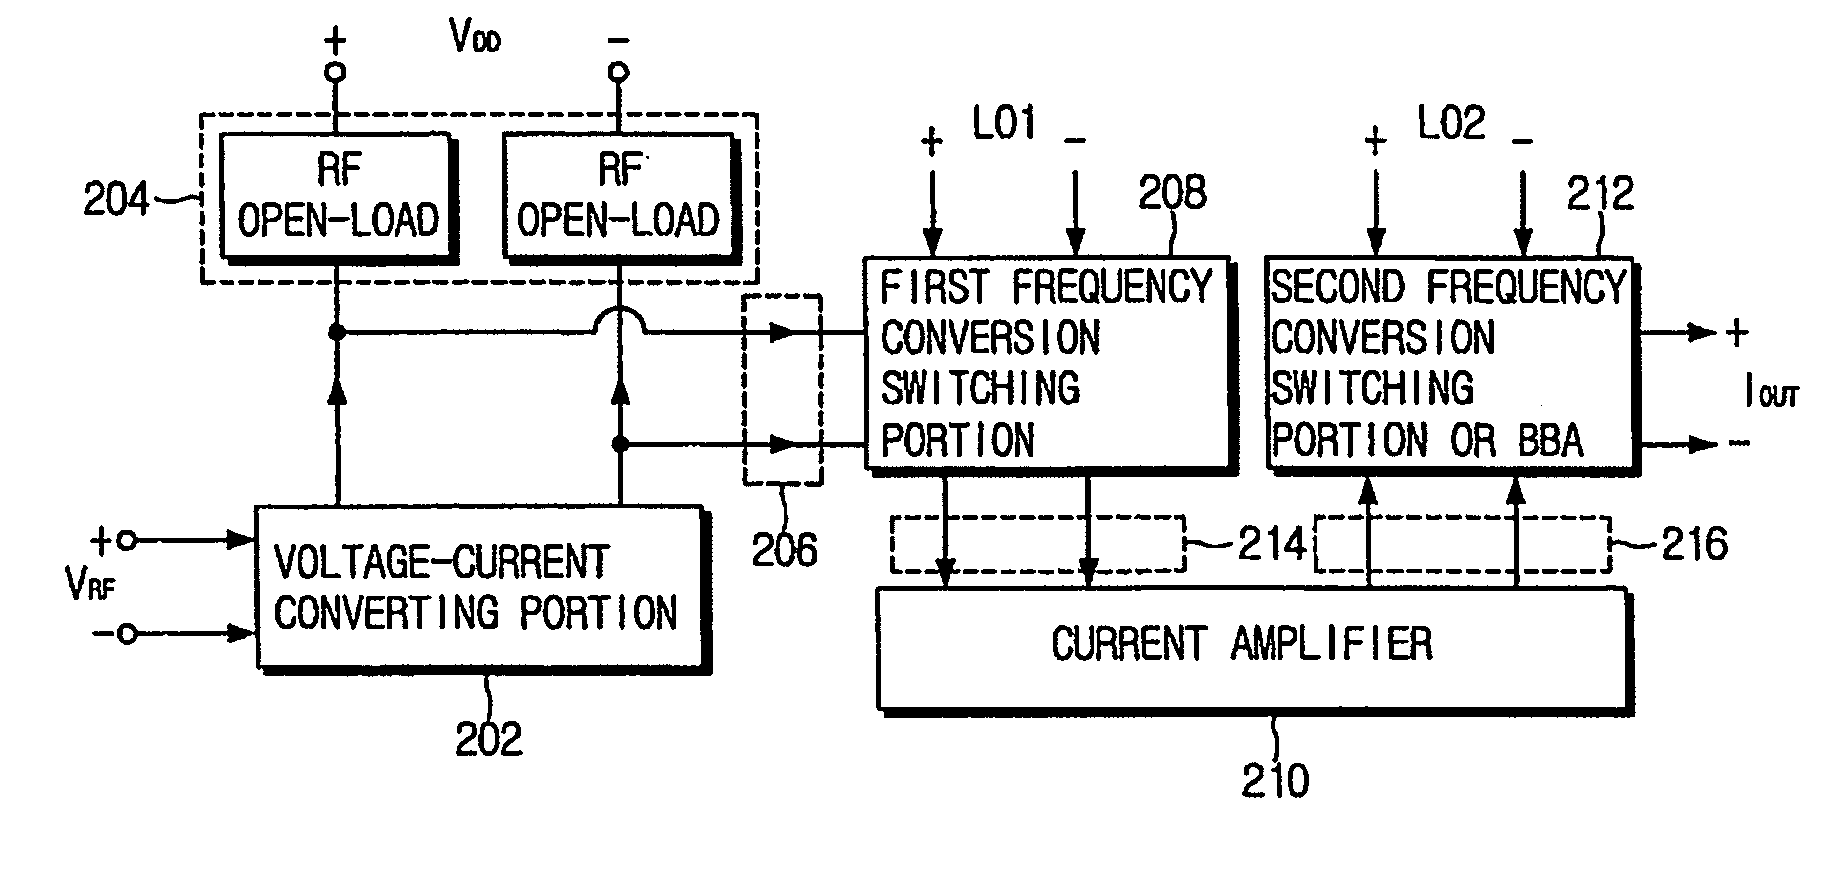 Linear mixer with current amplifier